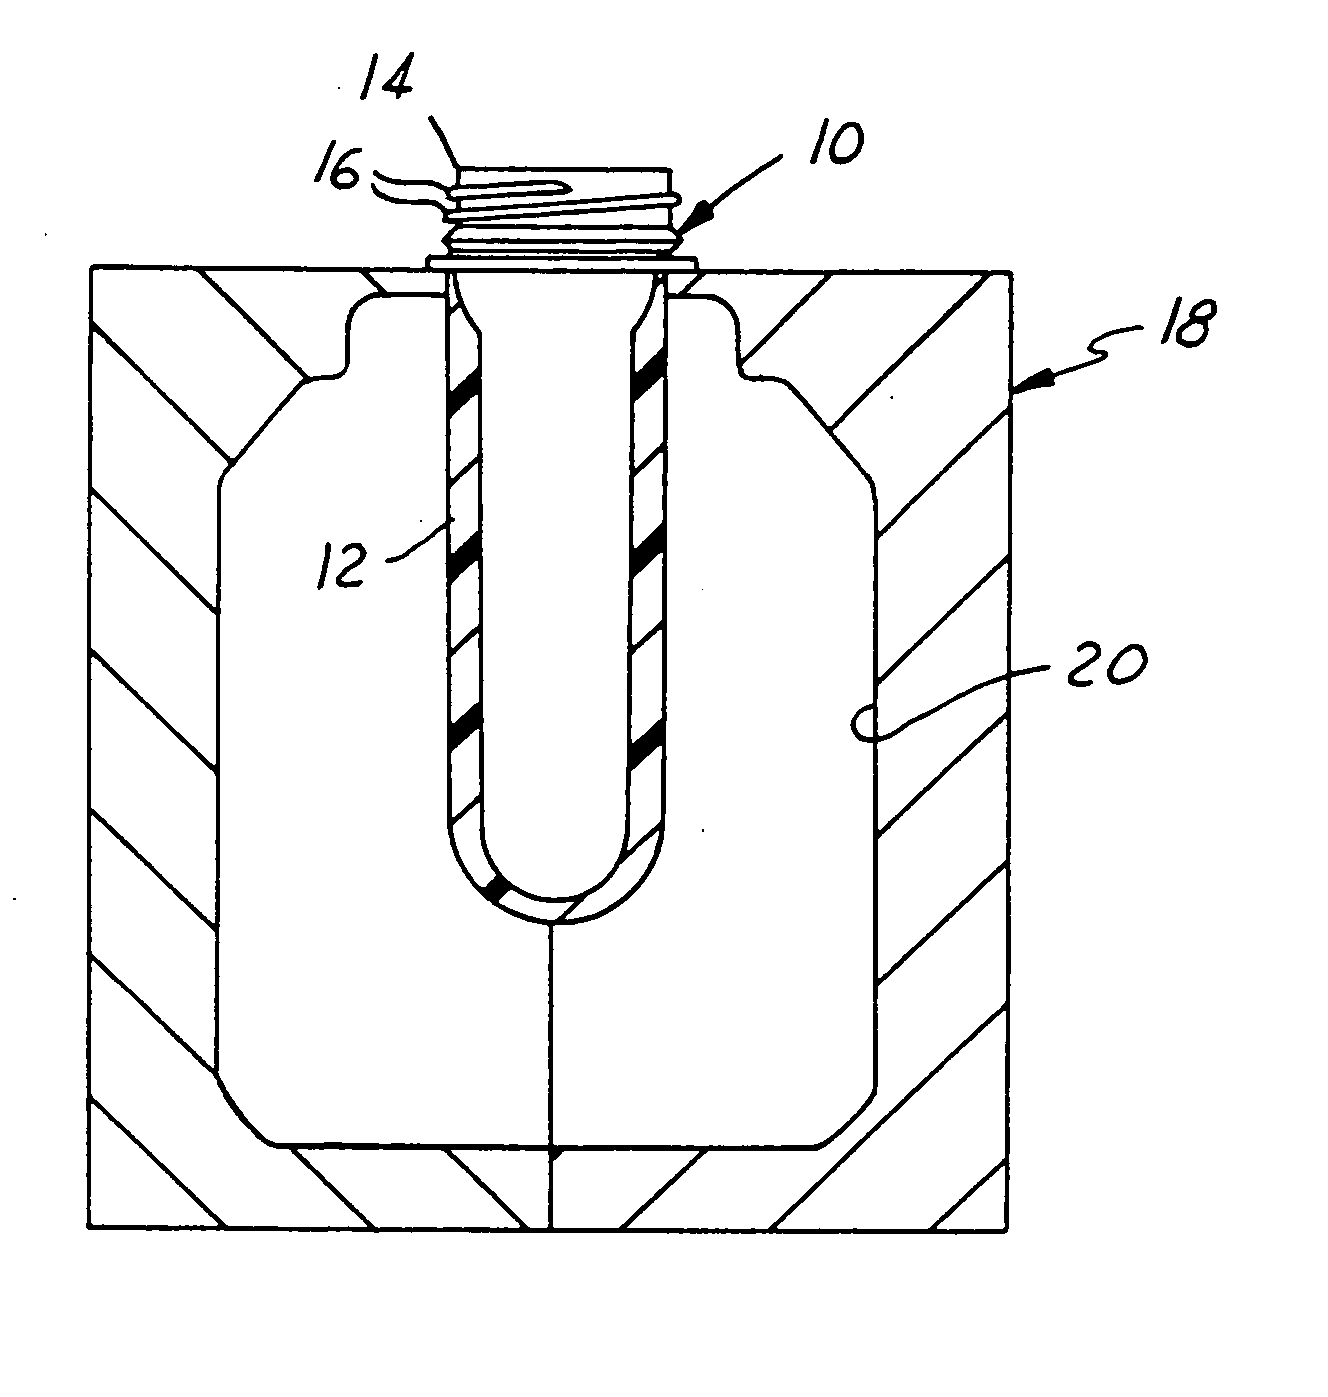 Stretched container threads and method of manufacture